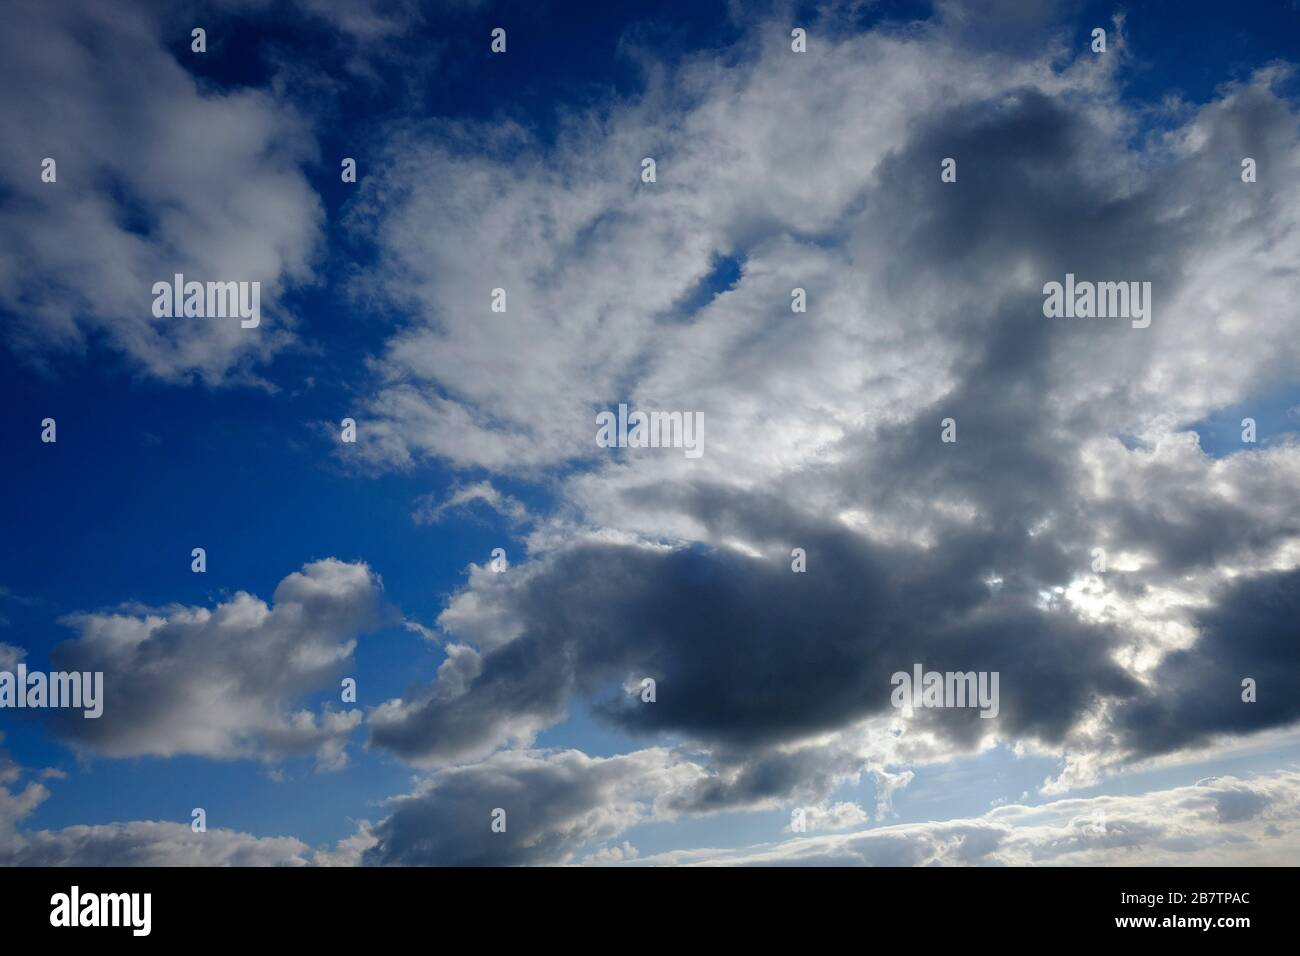 sunlight behind dark clouds on cloudy blue sky background Stock Photo